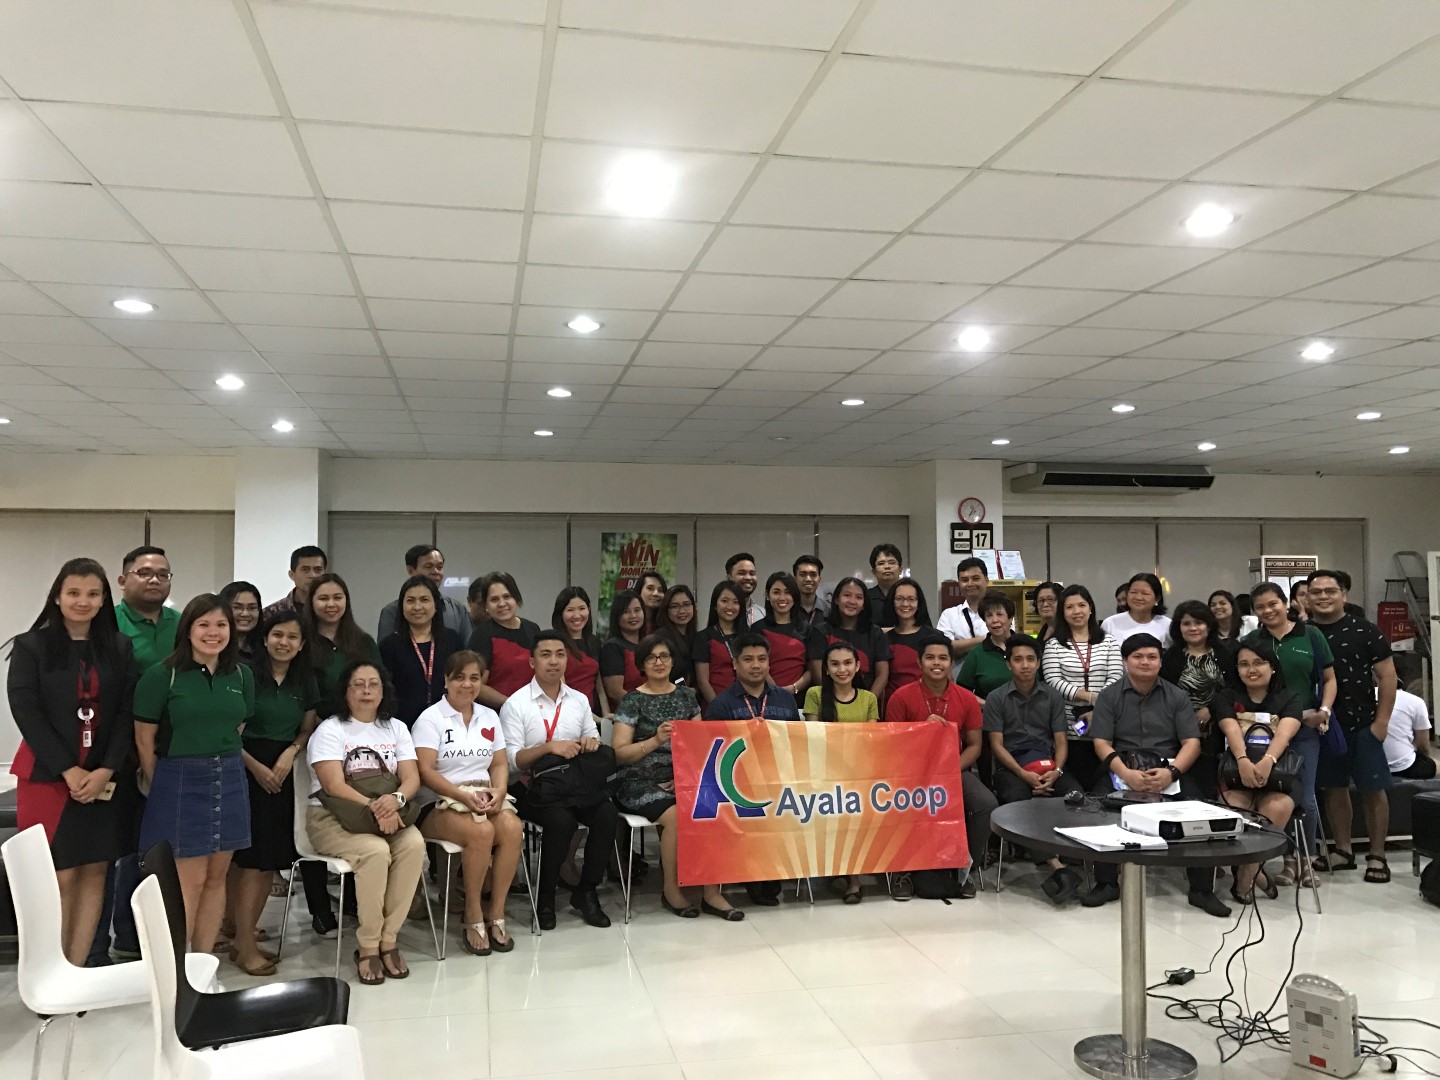 The members of the Coop team are shown here with officers and personnel of the Bank of the Philippine Islands branch office in Legazpi City during their visit there as part of the Coop’s ongoing familiarization activities in the provinces. 